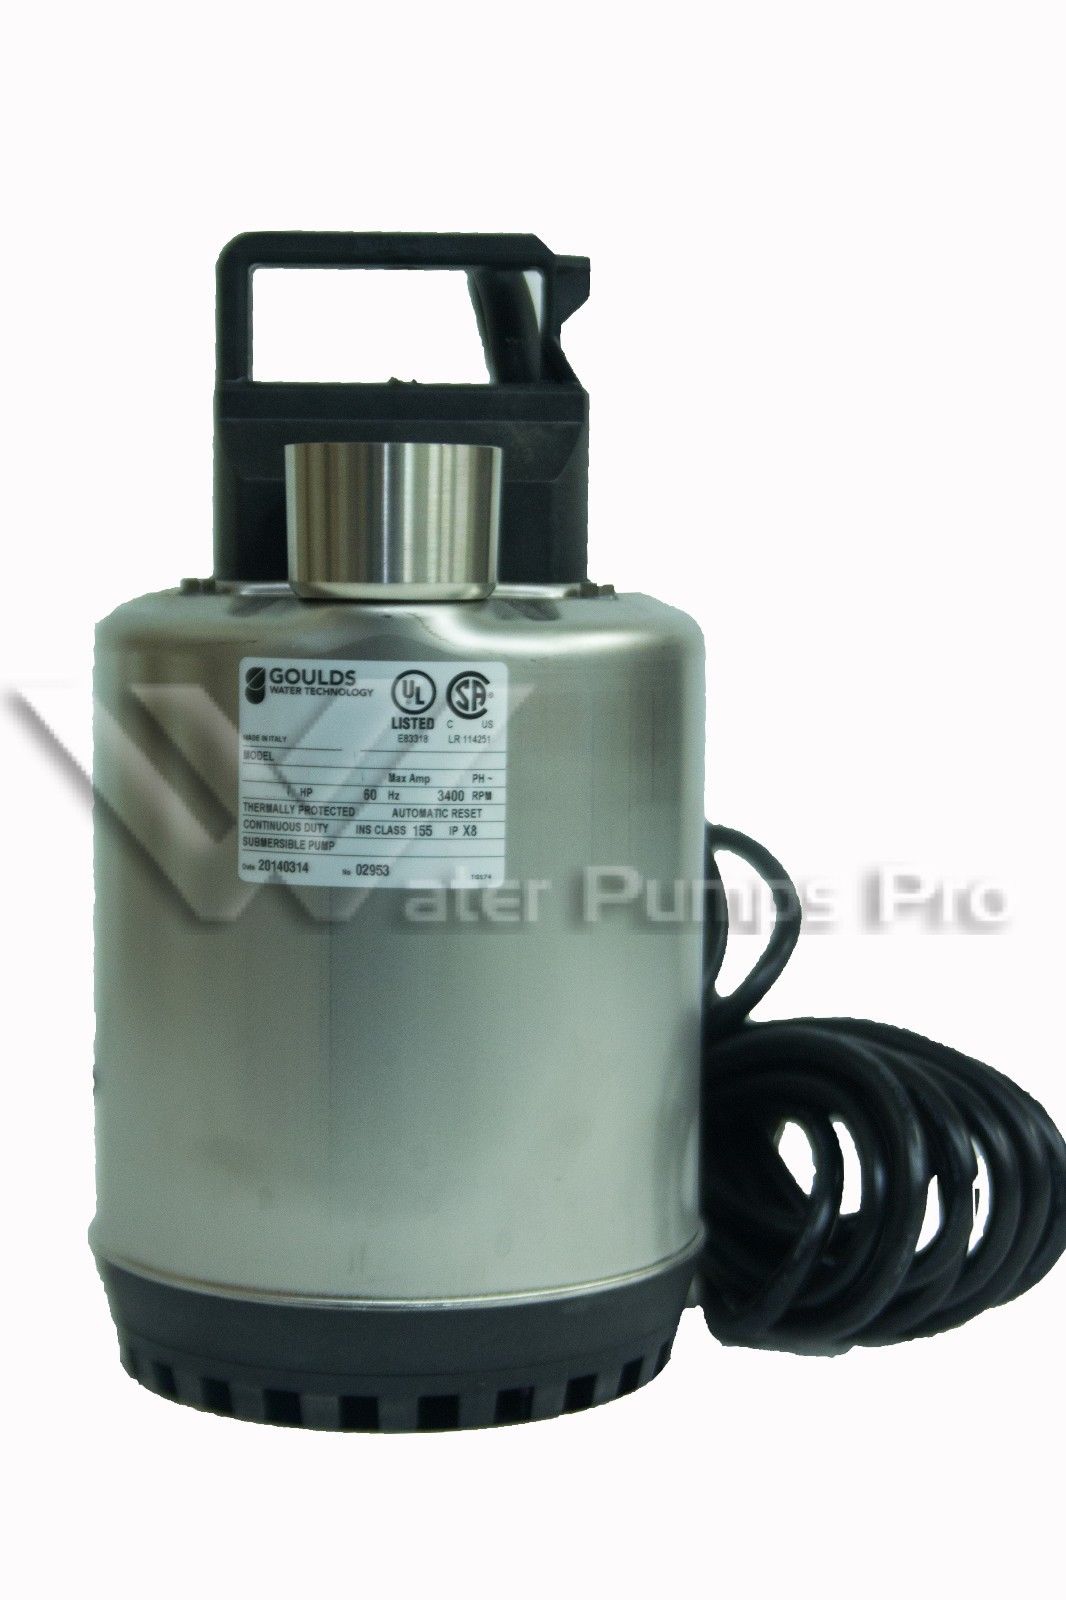 Goulds LSP0311F 1/3HP 115V- Submersible Sump Pump